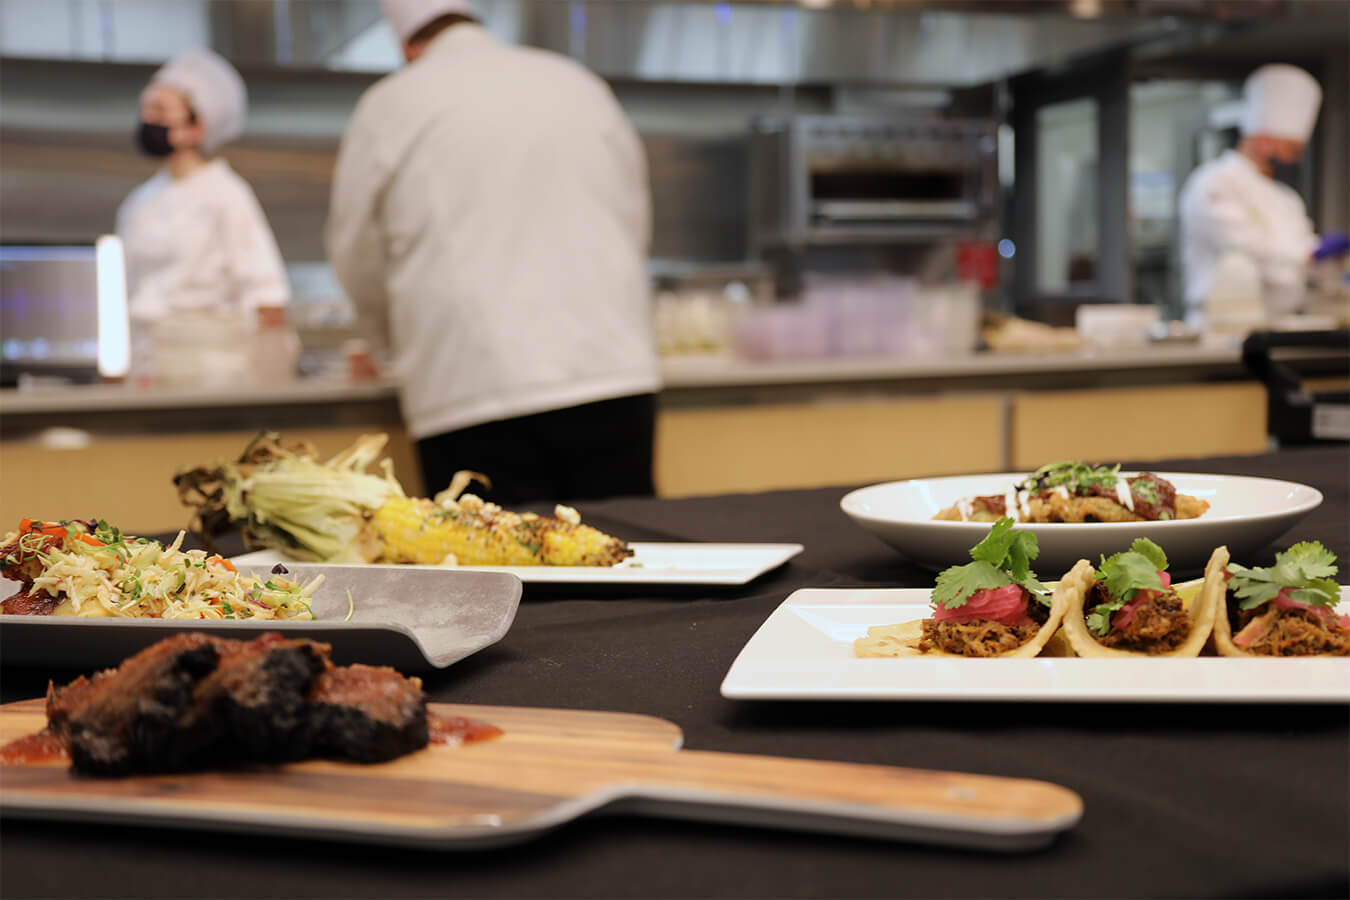 Assorted plated menu items with chefs in background